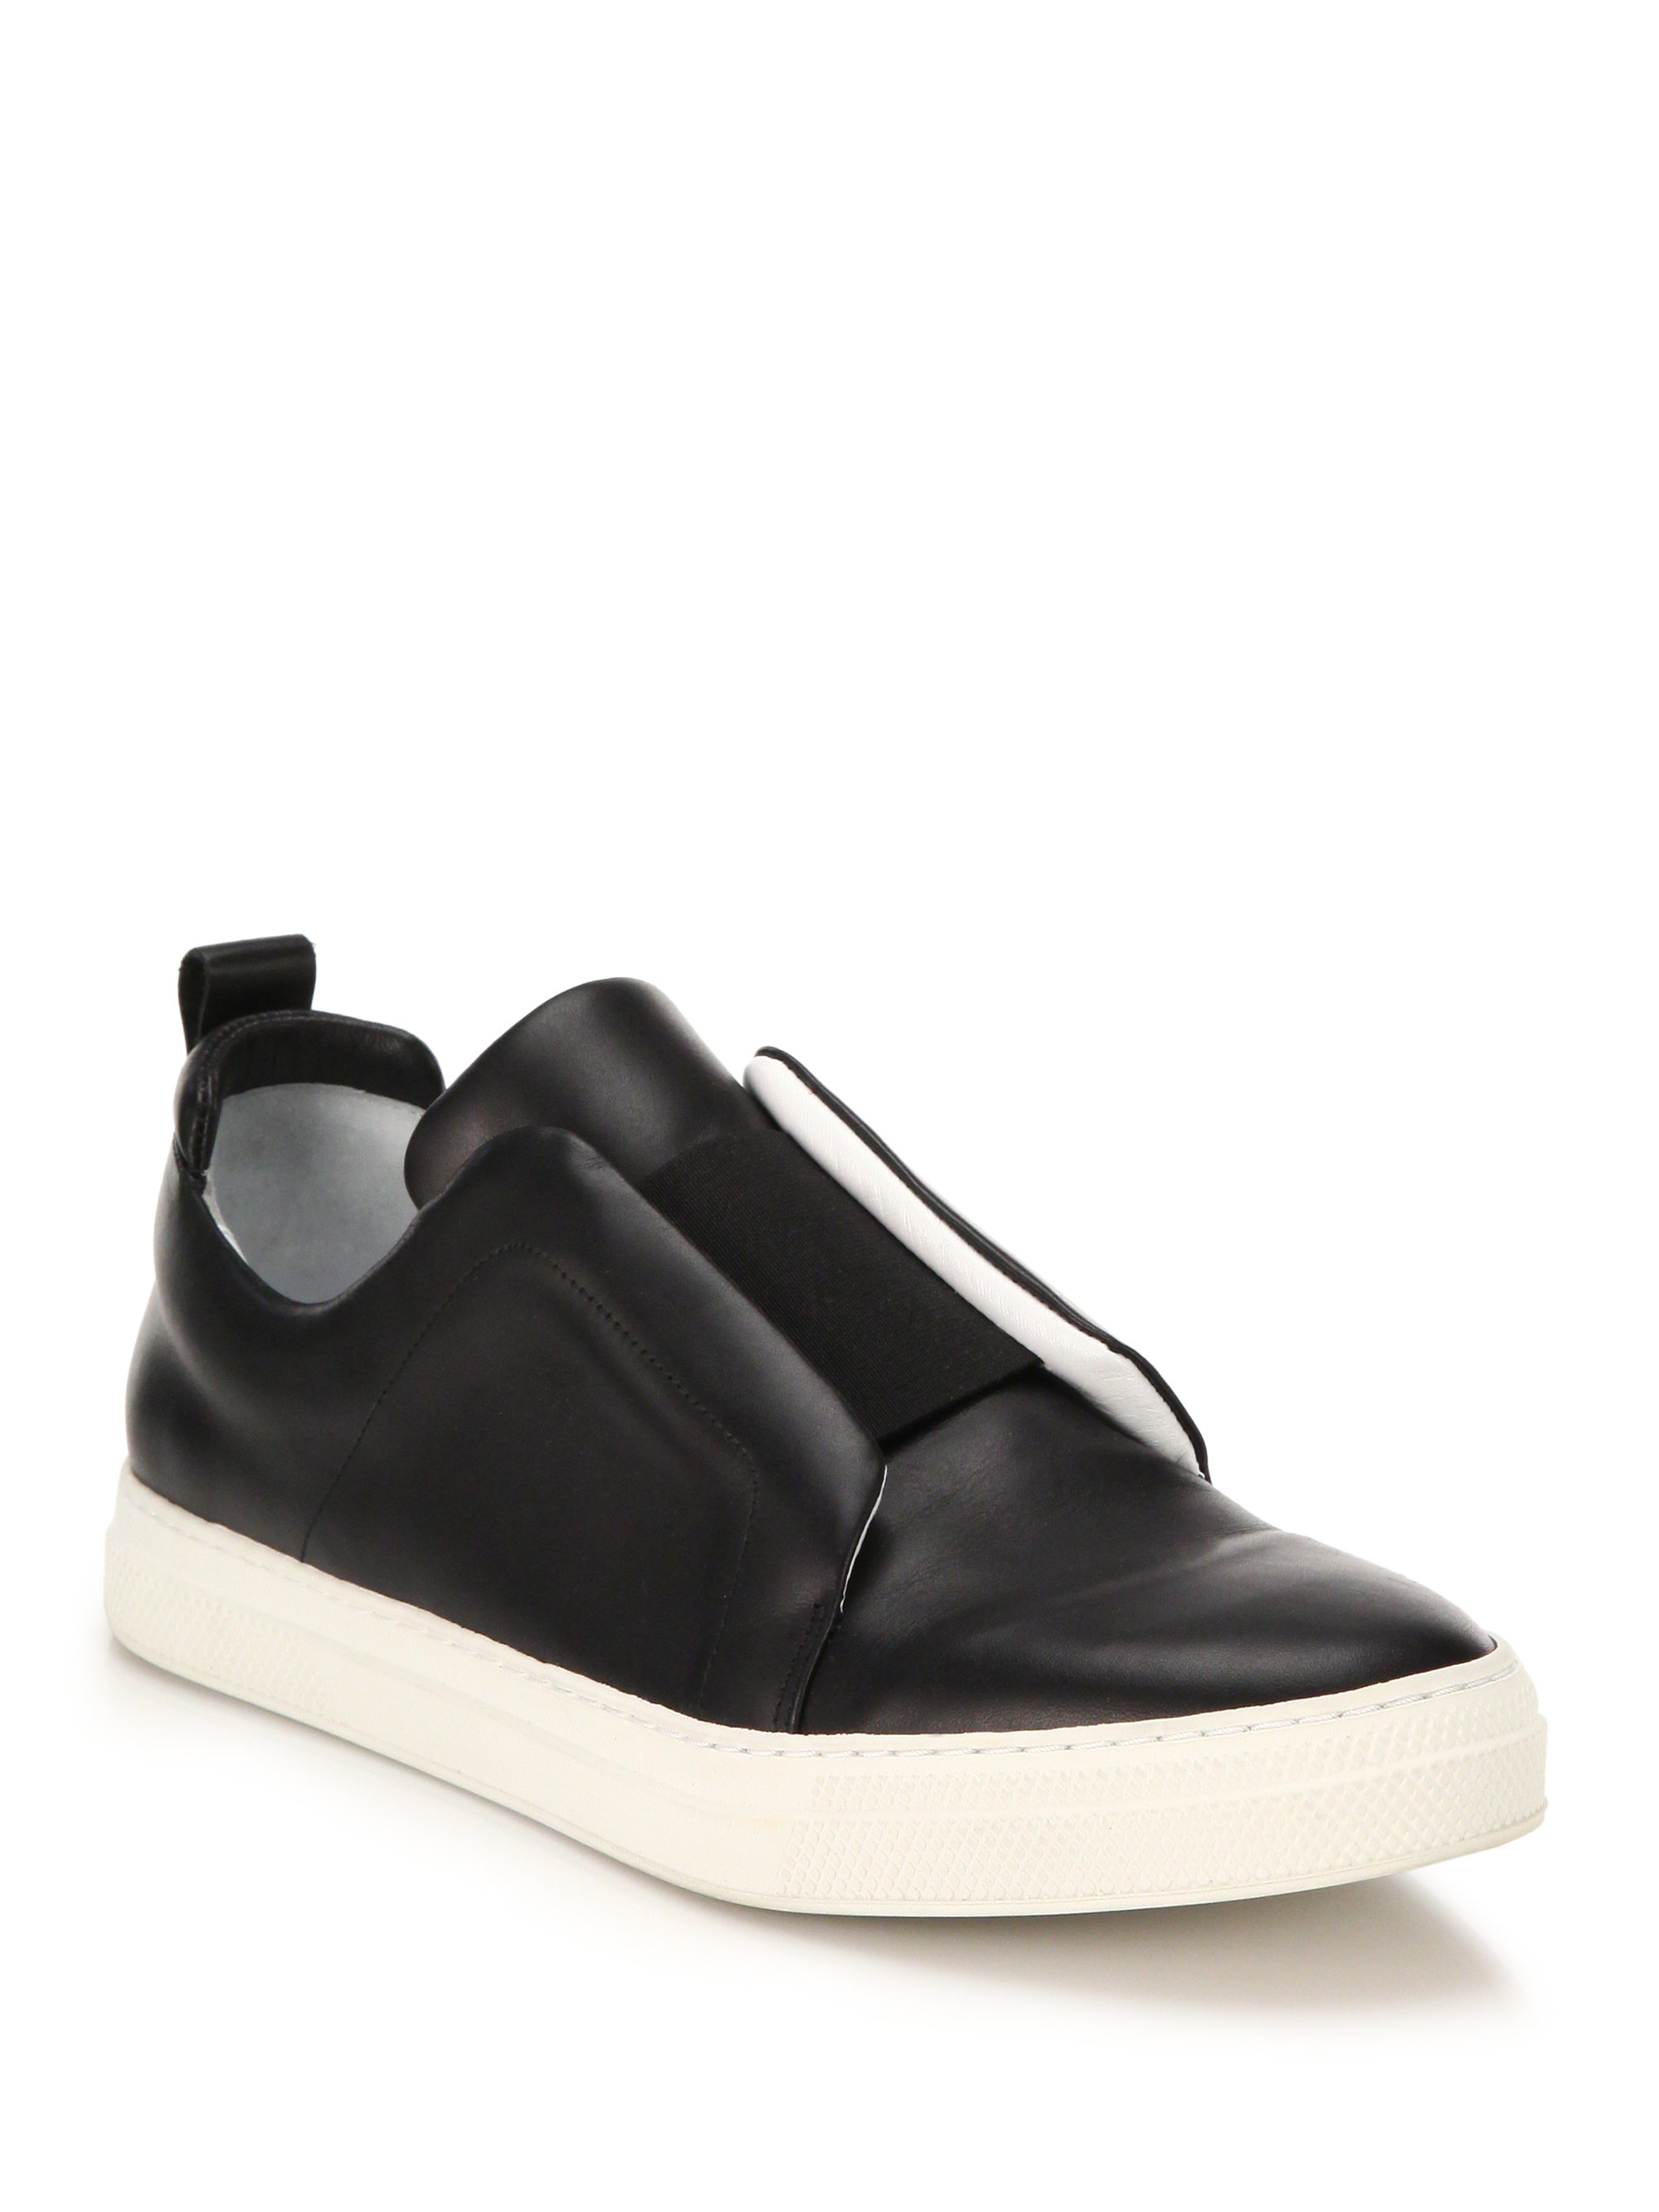 Lyst - Pierre Hardy Leather Banded Slip-on Sneakers in Black for Men